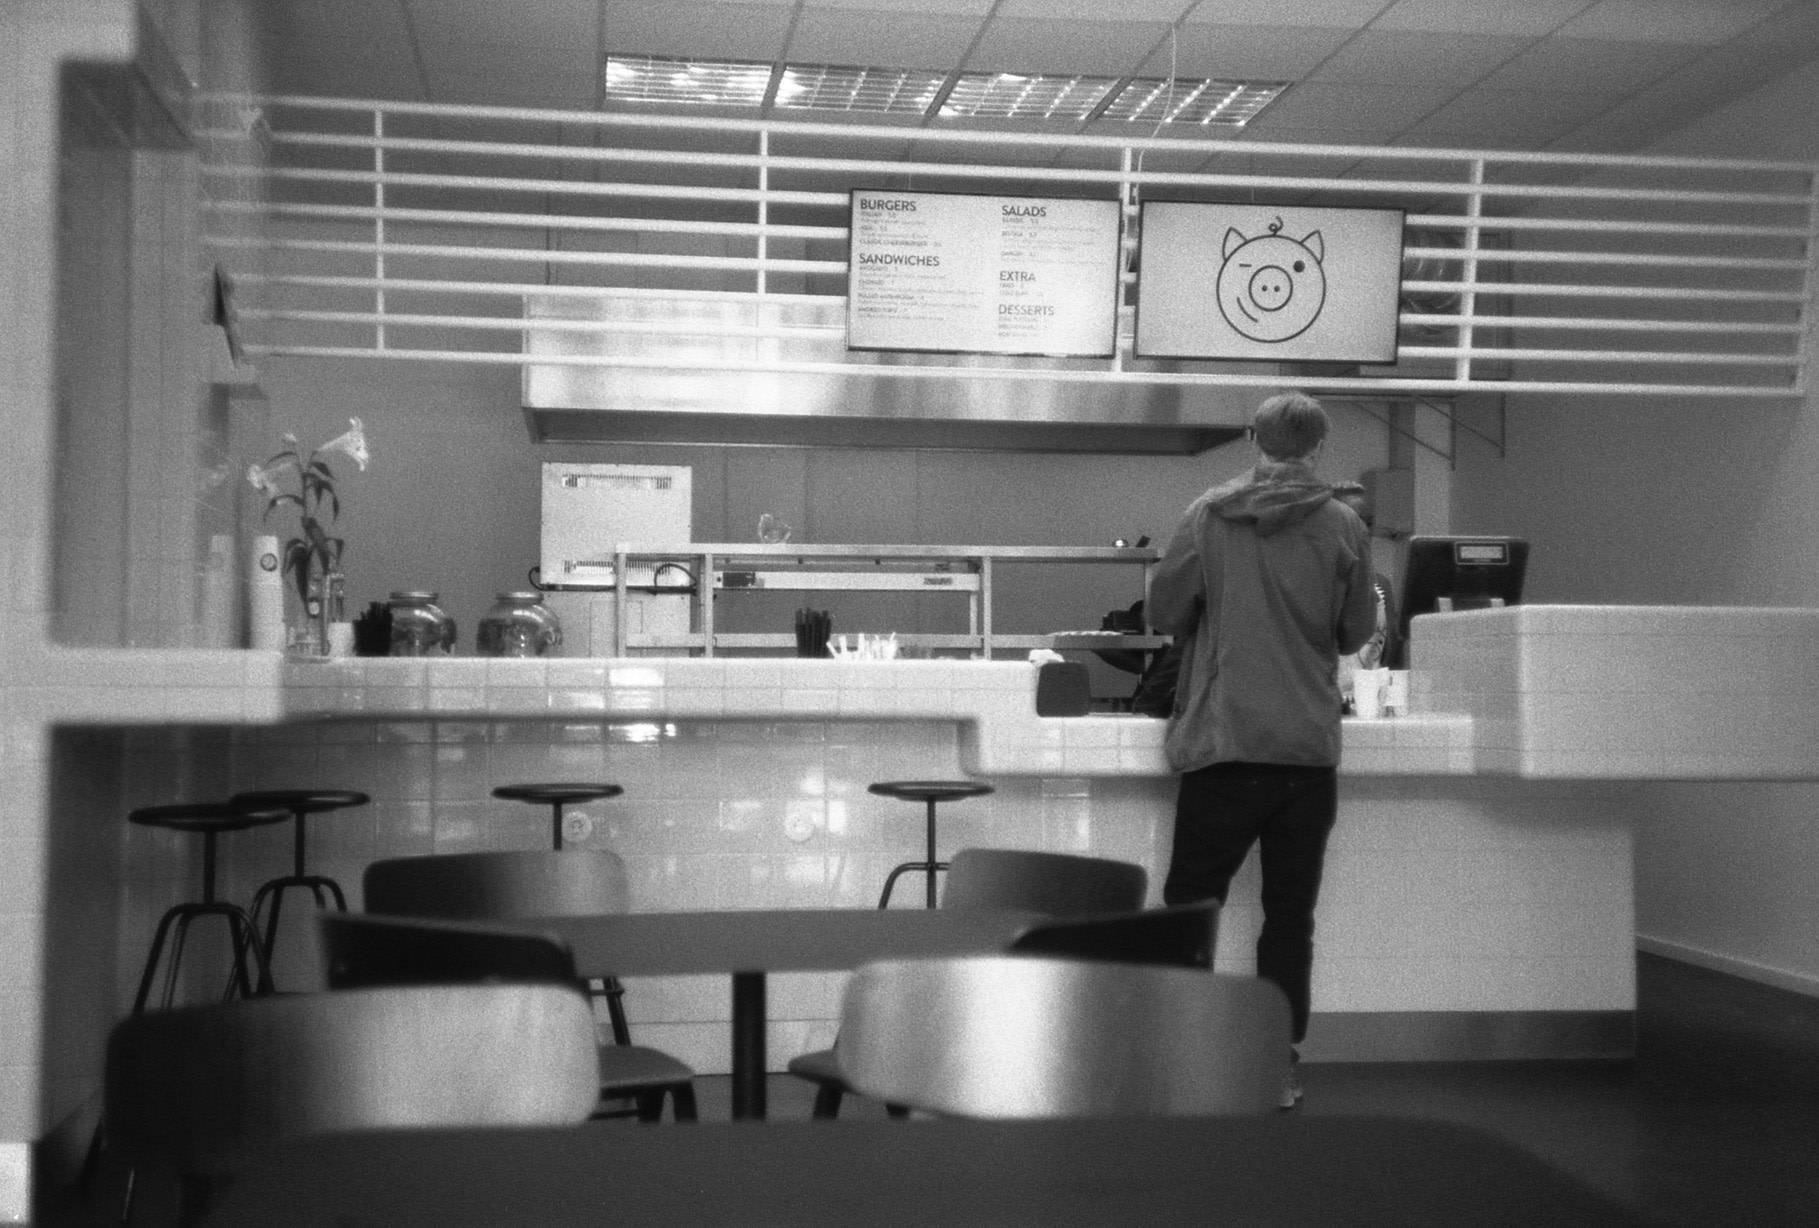 interior of a restaurant where a person seen from behind is ordering at the counter, the sign above the counter has a cartoon pig face